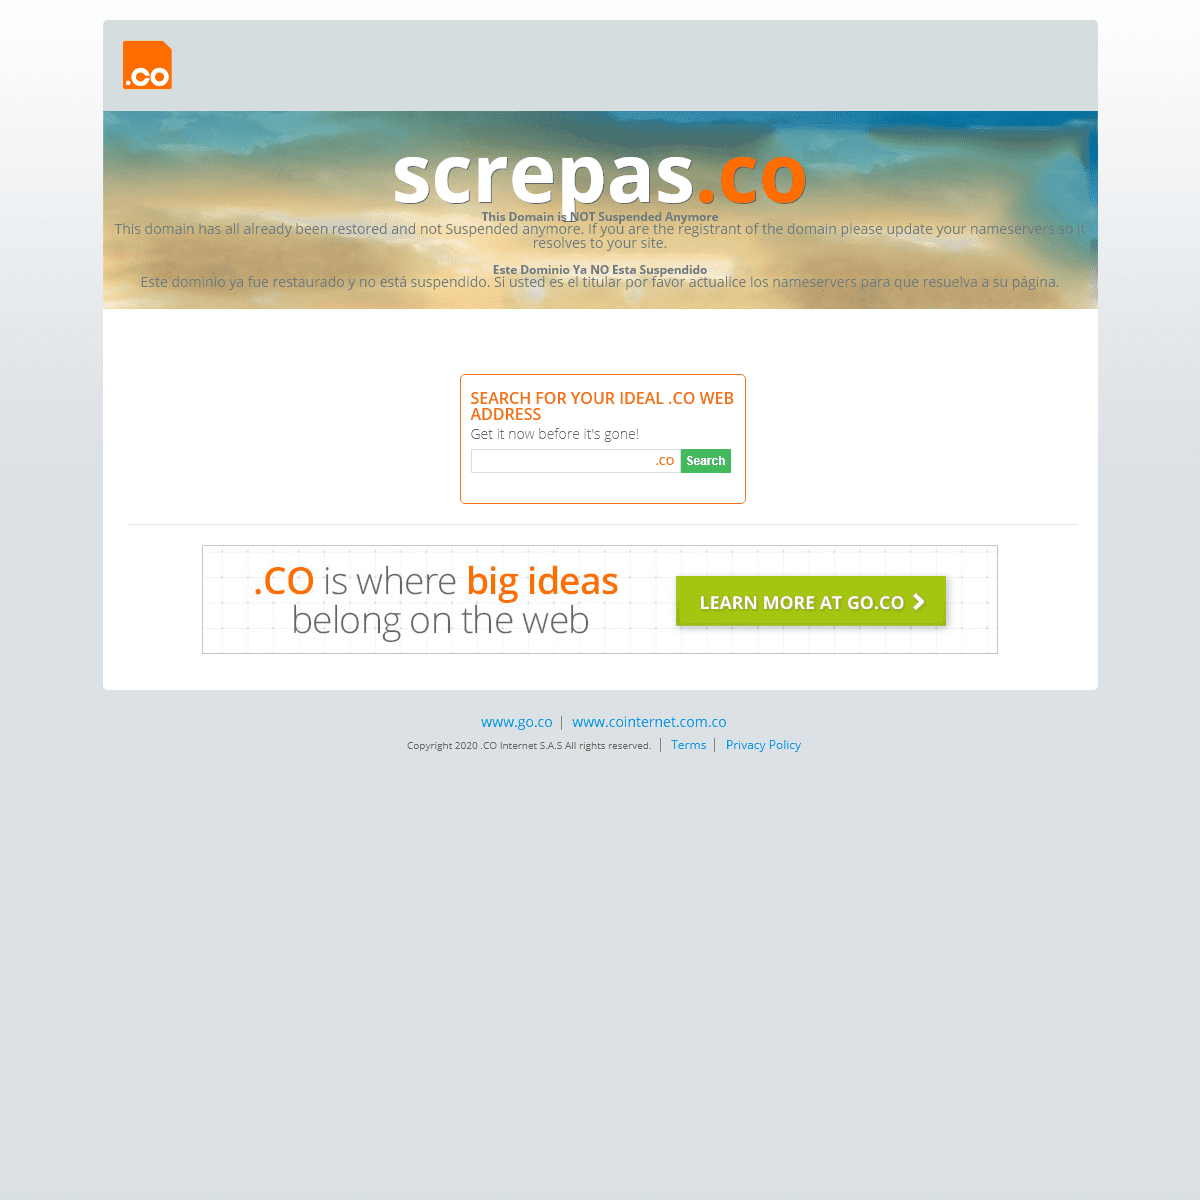 A complete backup of screpas.co